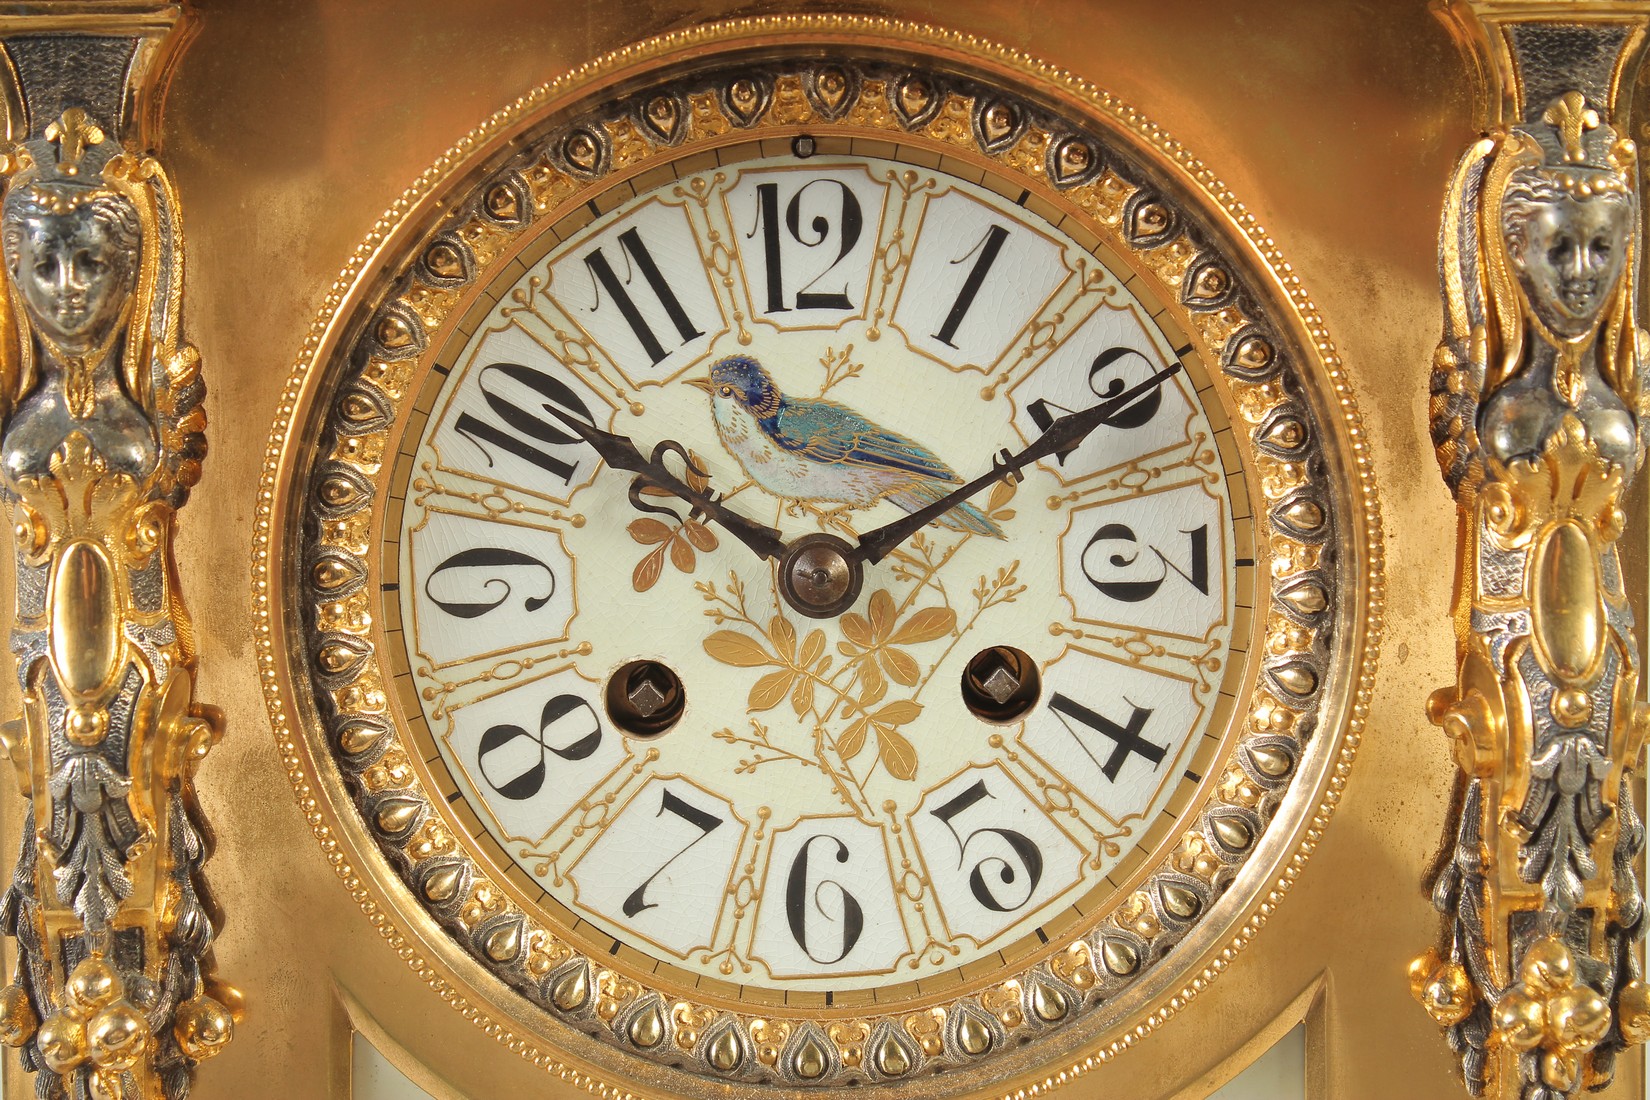 A GOOD 19TH CENTURY FRENCH ORMOLU MANTLE CLOCK possibly by ACHILLE BROCOT, with eight day movement - Image 6 of 6